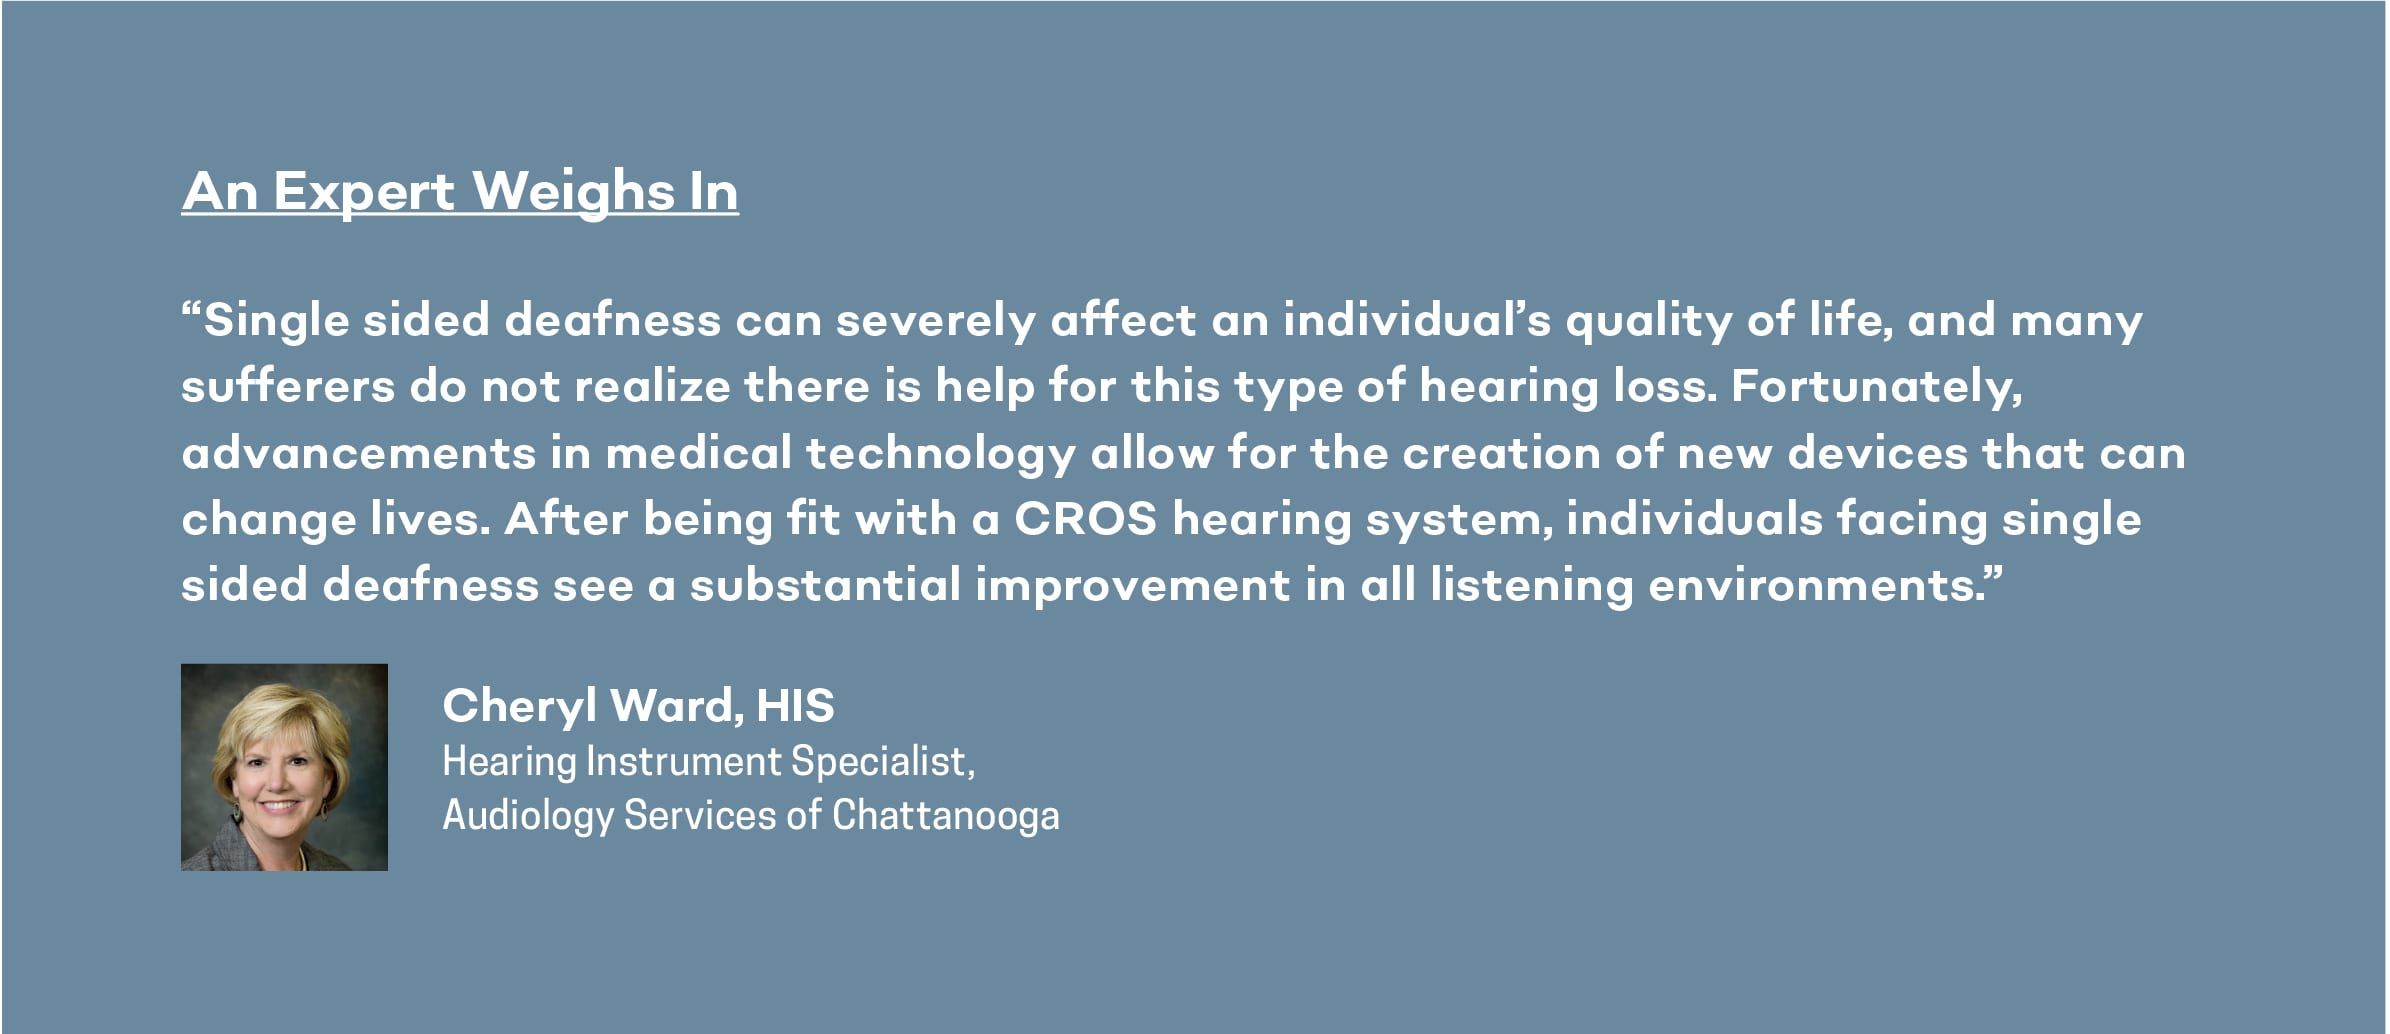 expert opinion on treating single sided deafness wit ha CROS hearing system in chattanooga from Cheryl Ward, HIS 